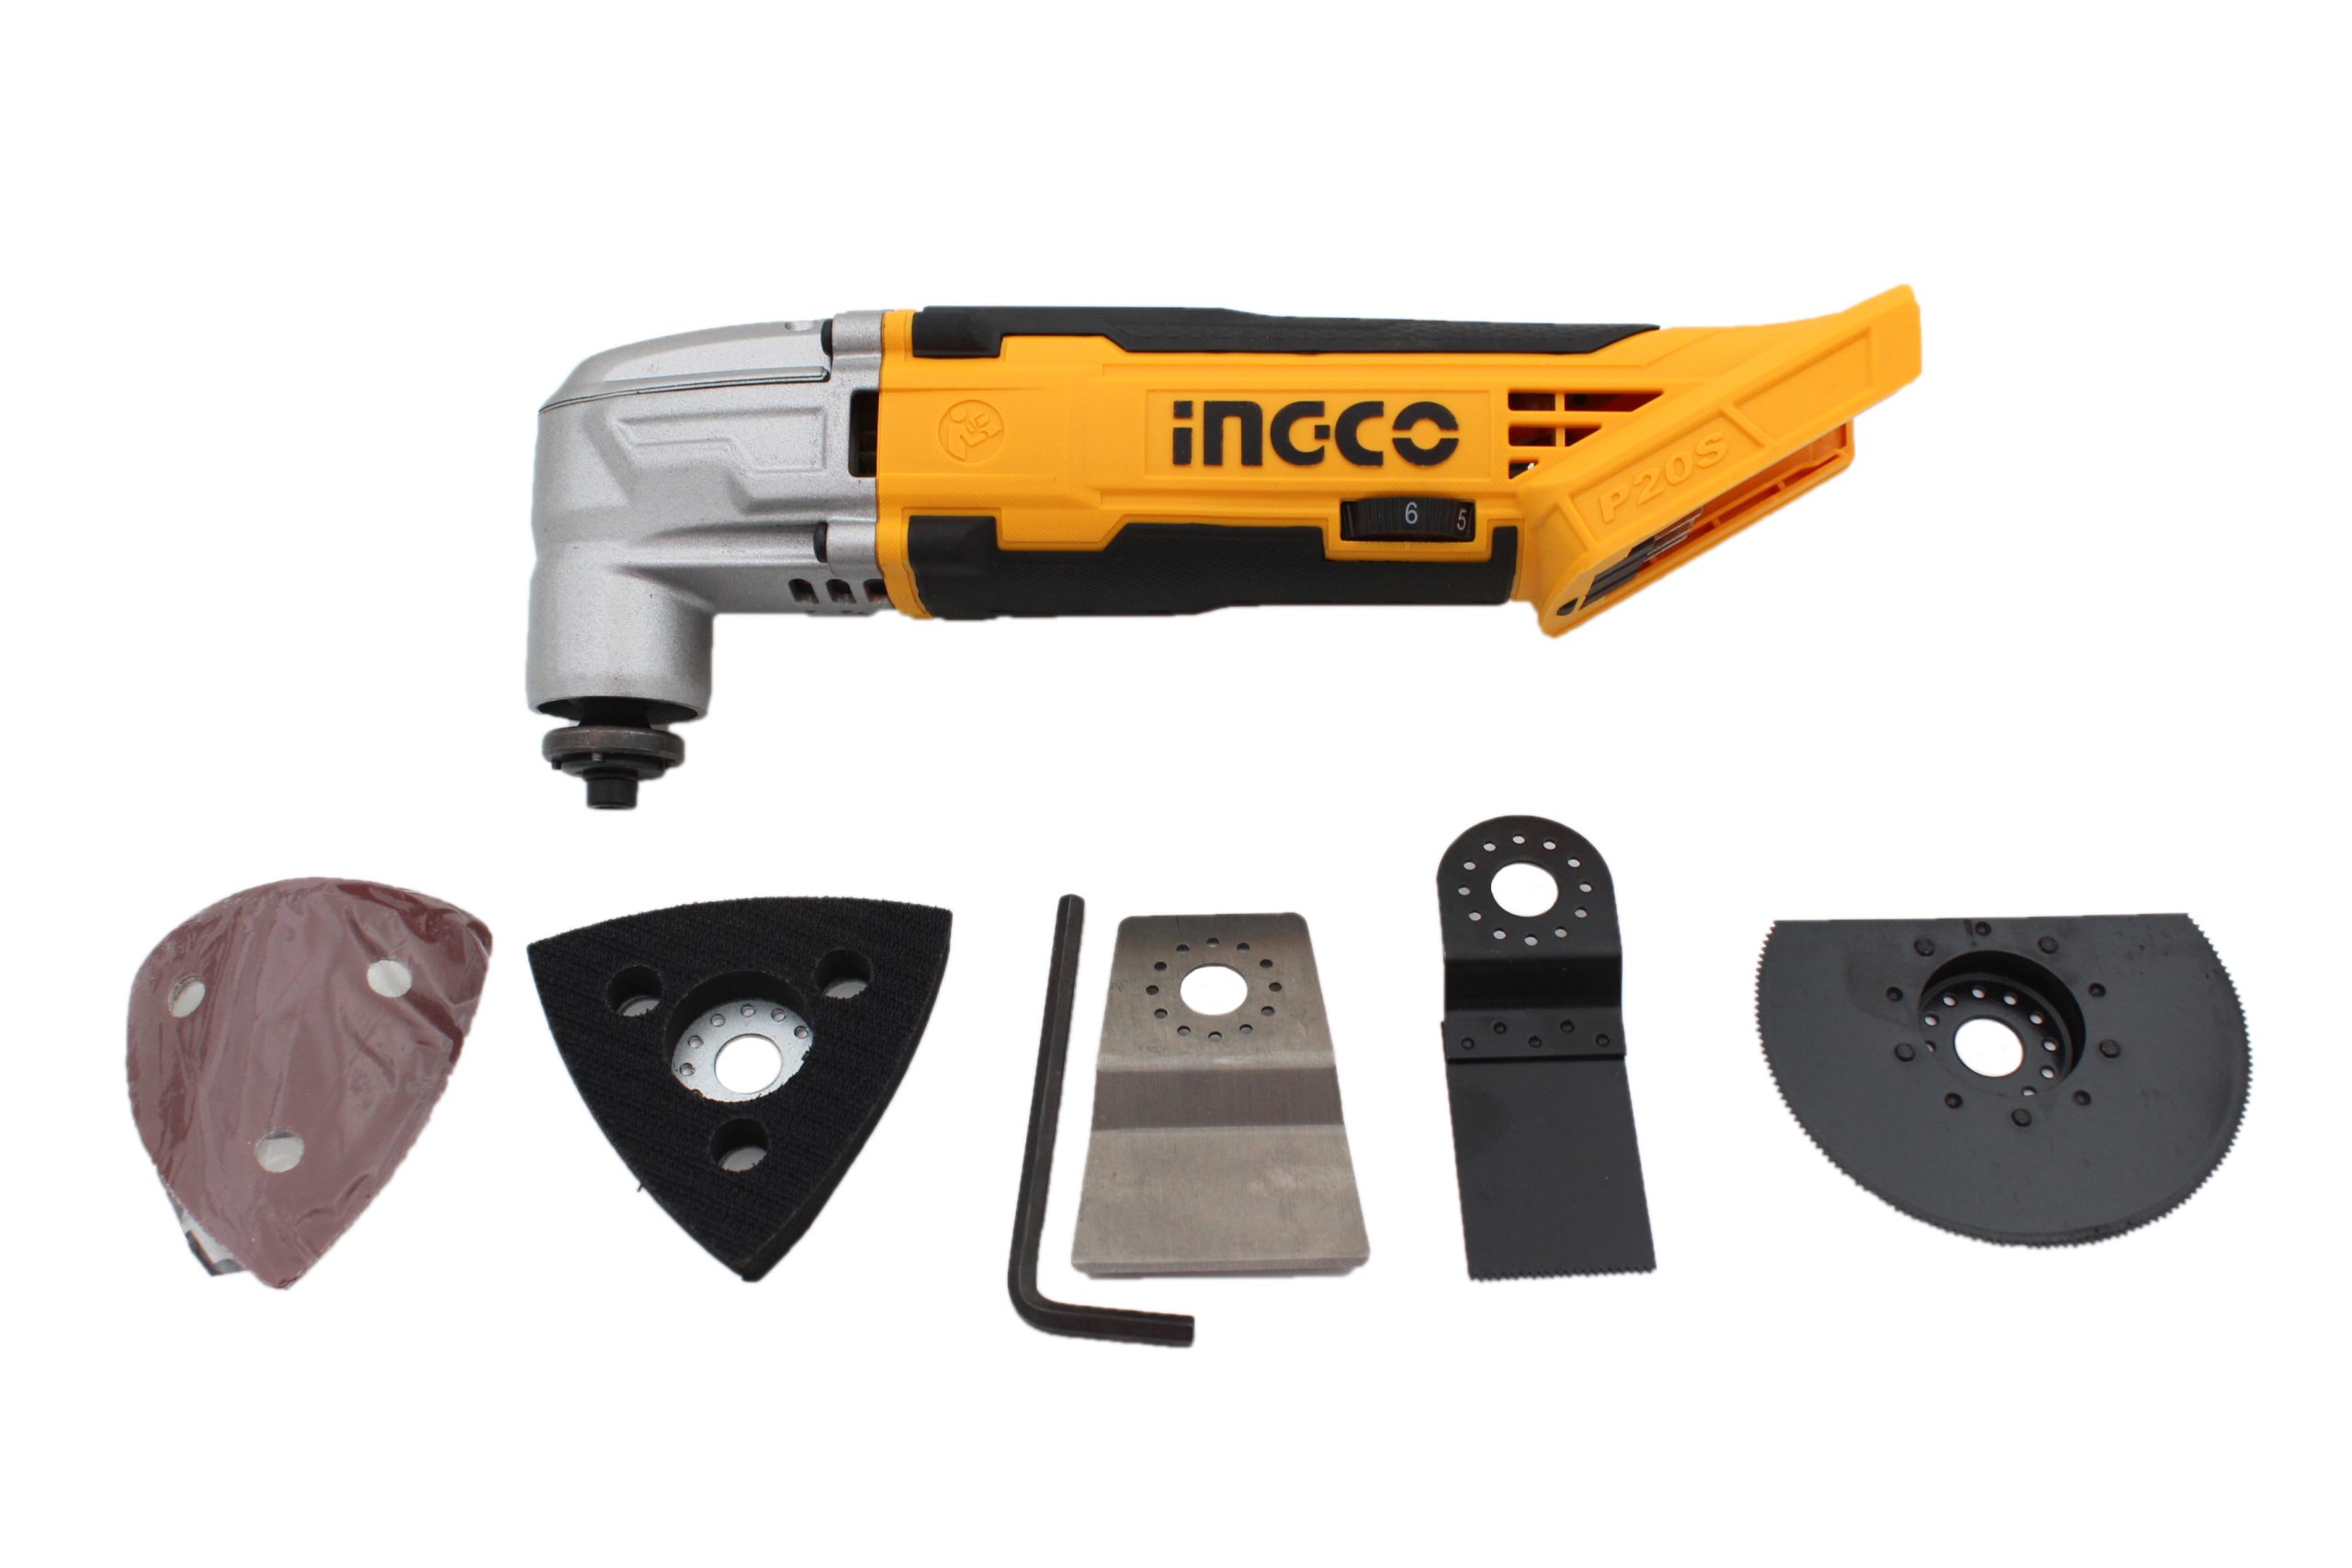 Ingco Cordless Multi-Tool 20V - WH Hardware and Building Supplies in ...